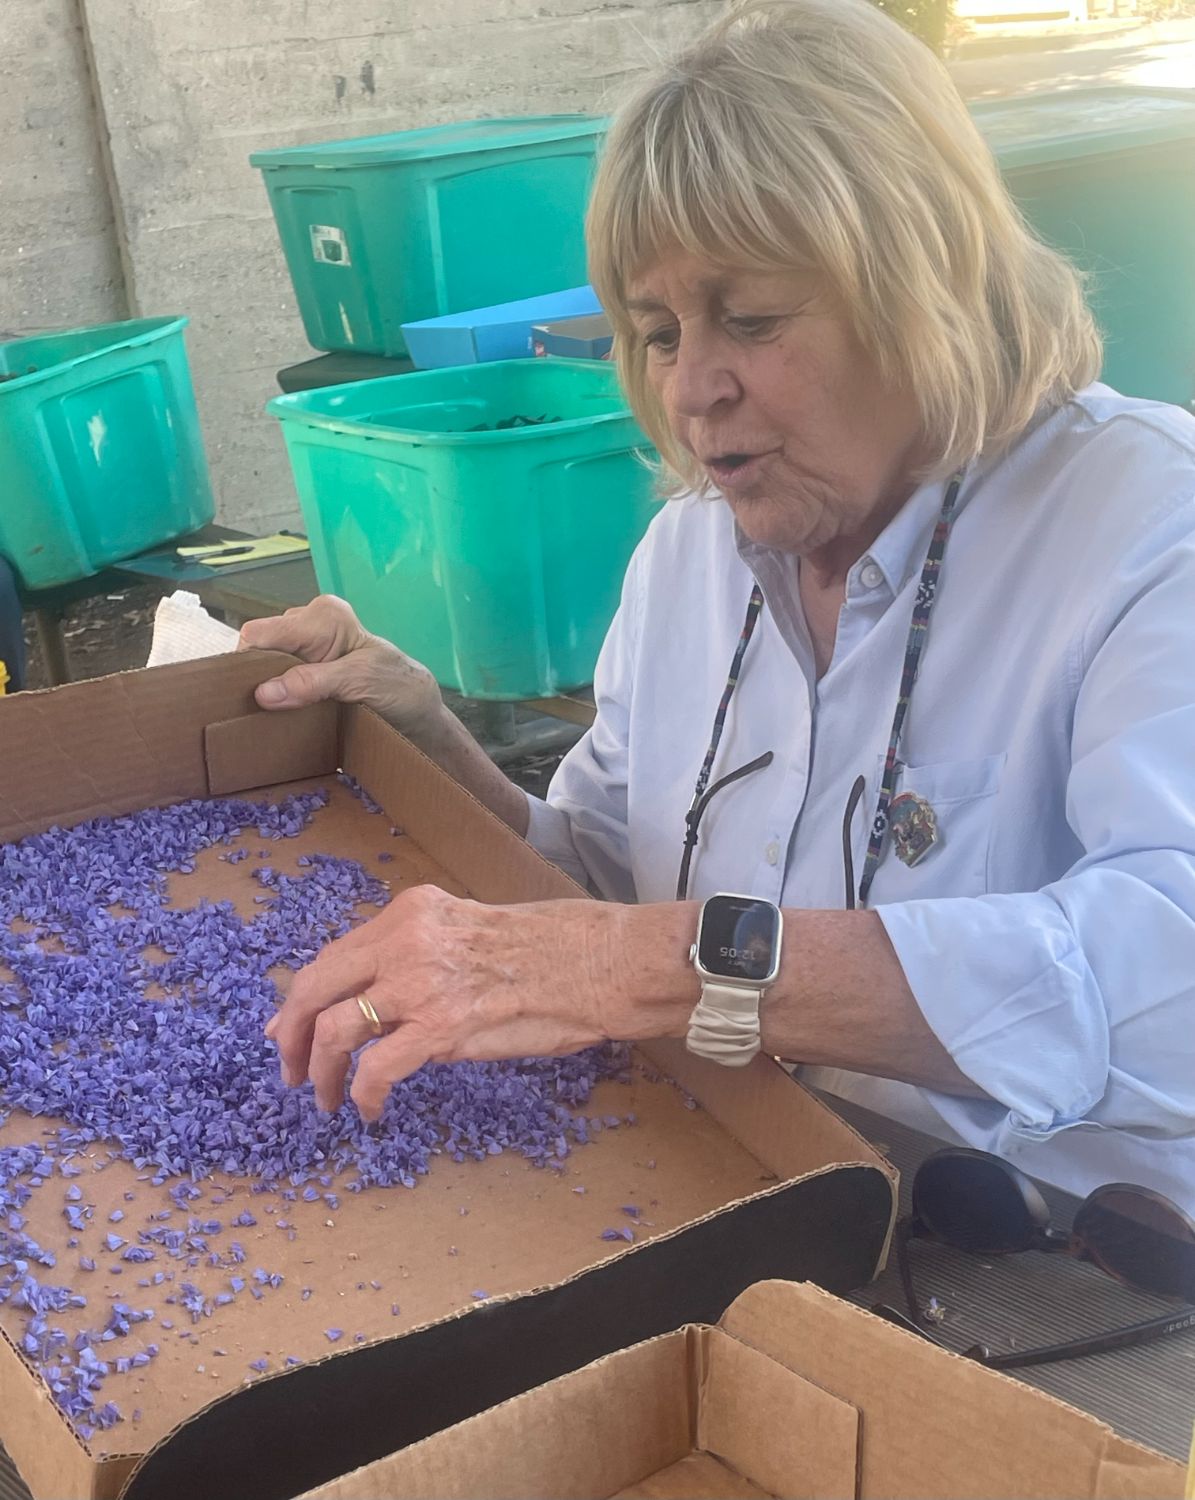 PHOTO: Sally Kilby | The South Pasadenan | Deco Squad member Karen Ball cuts dried statice blossoms off stems at a recent work session. They will be gathered and glued onto the “Boogie Fever” float later in the decoration process.